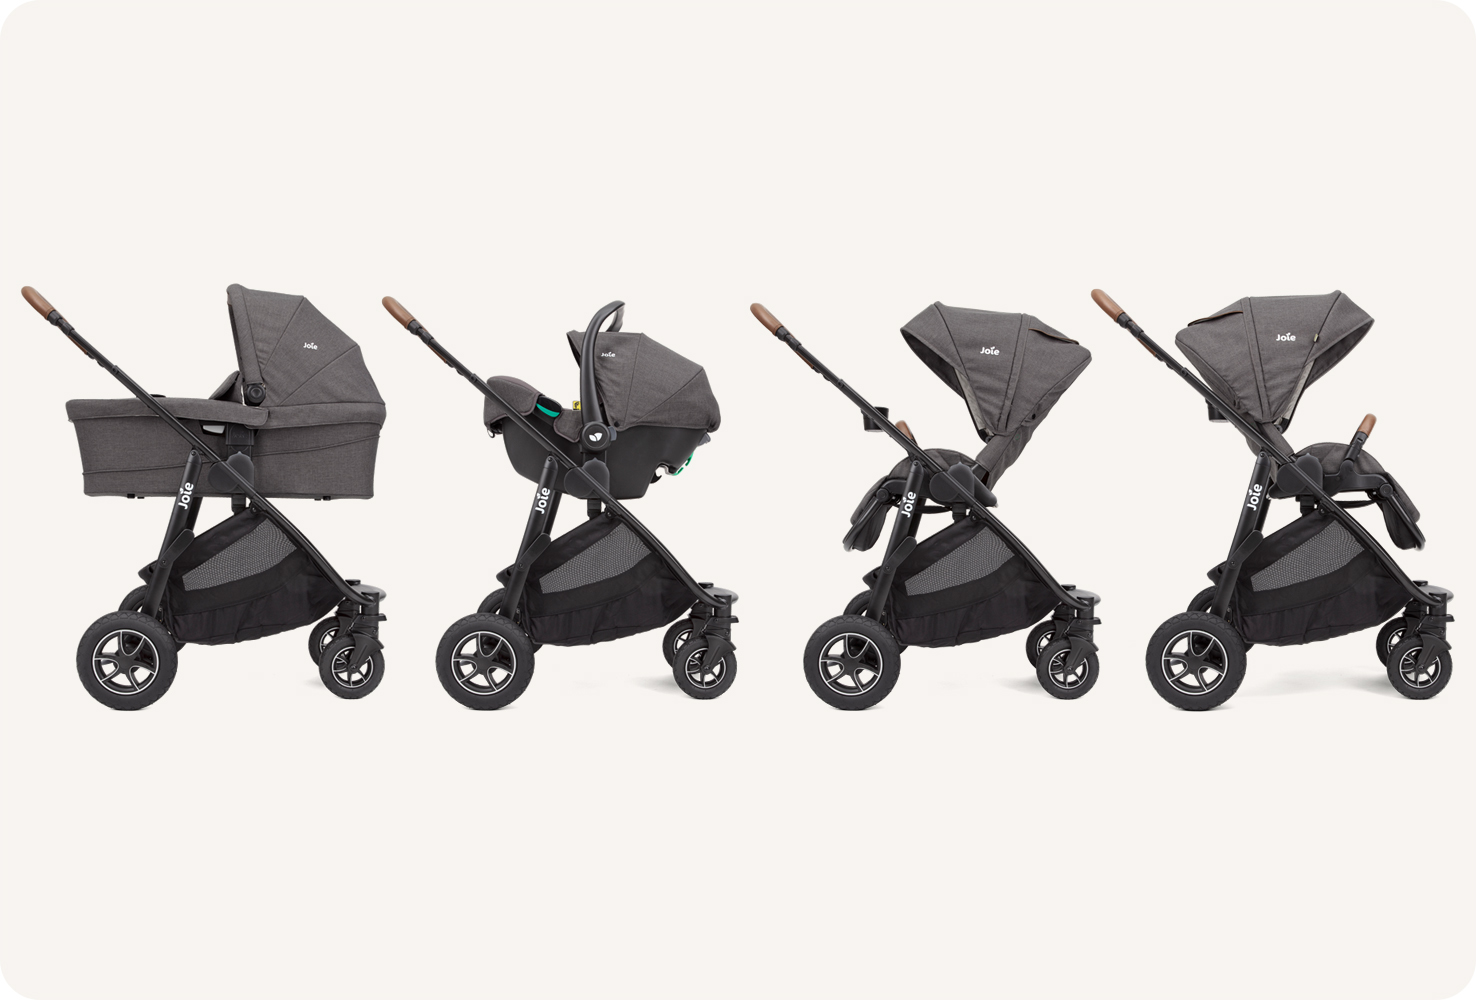  4 gray Joie Versatrax prams in profile. Showing the 4 modes from left to right: carry cot, infant car seat, parent facing pushchair, and world facing pushchair.